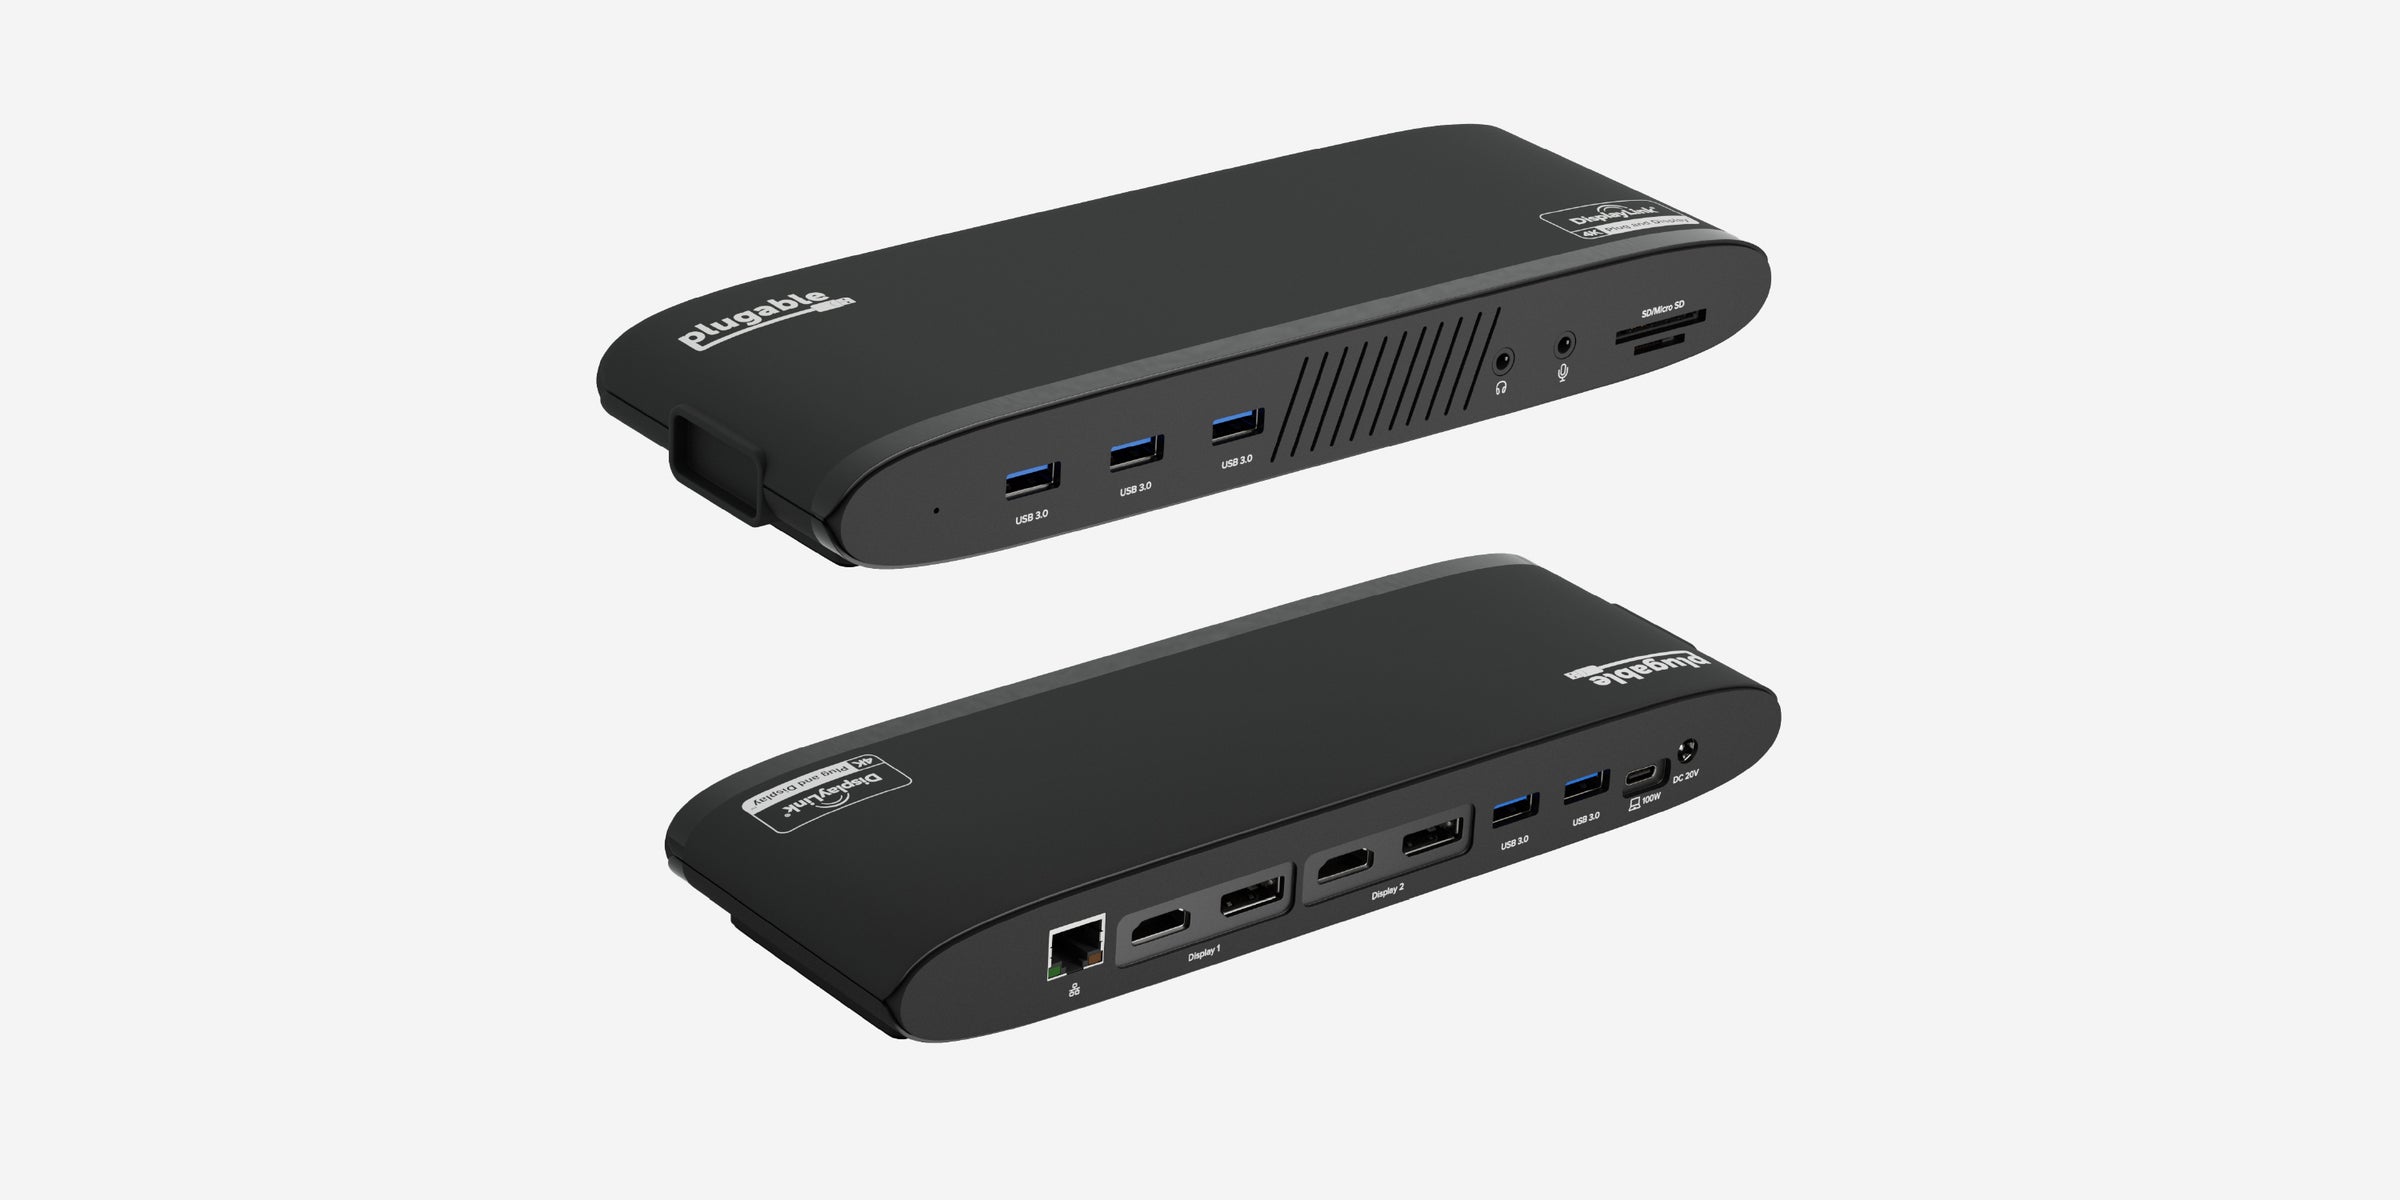 Plugable UD-6950PDH is the best dual monitor docking station for M2 Mac